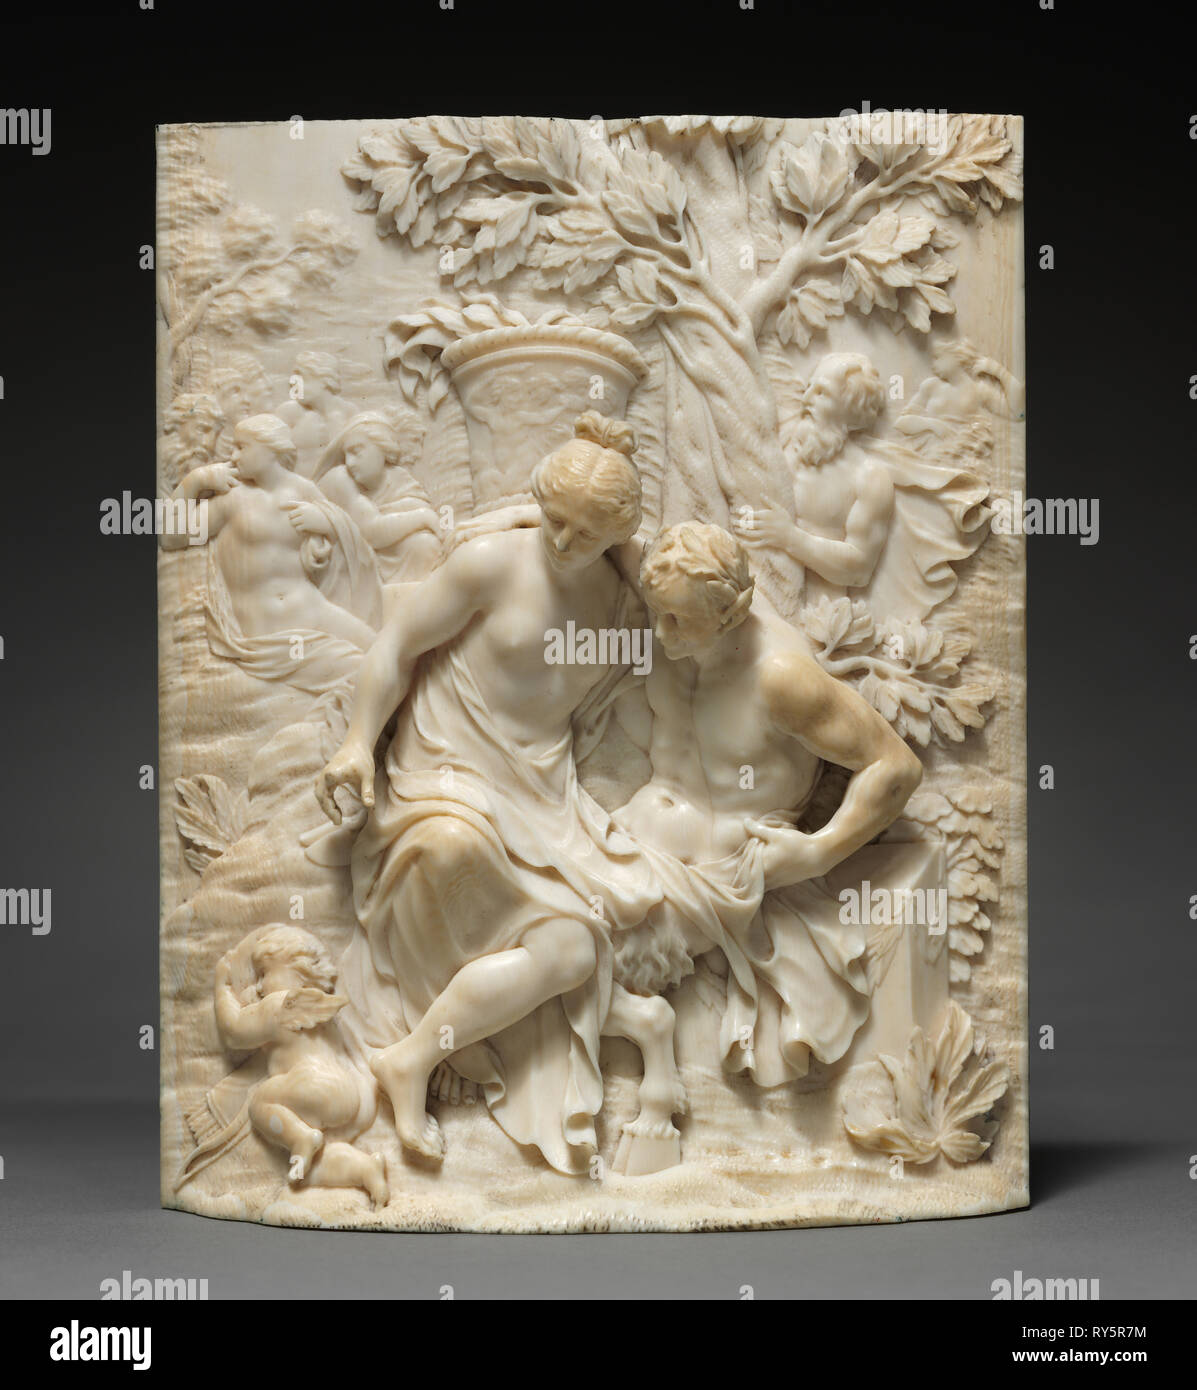 Venus and a Satyr , c. 1700. Ignaz Elhafen (German, 1658-1715). Ivory; overall: 15.5 x 12.4 x 3 cm (6 1/8 x 4 7/8 x 1 3/16 in Stock Photo